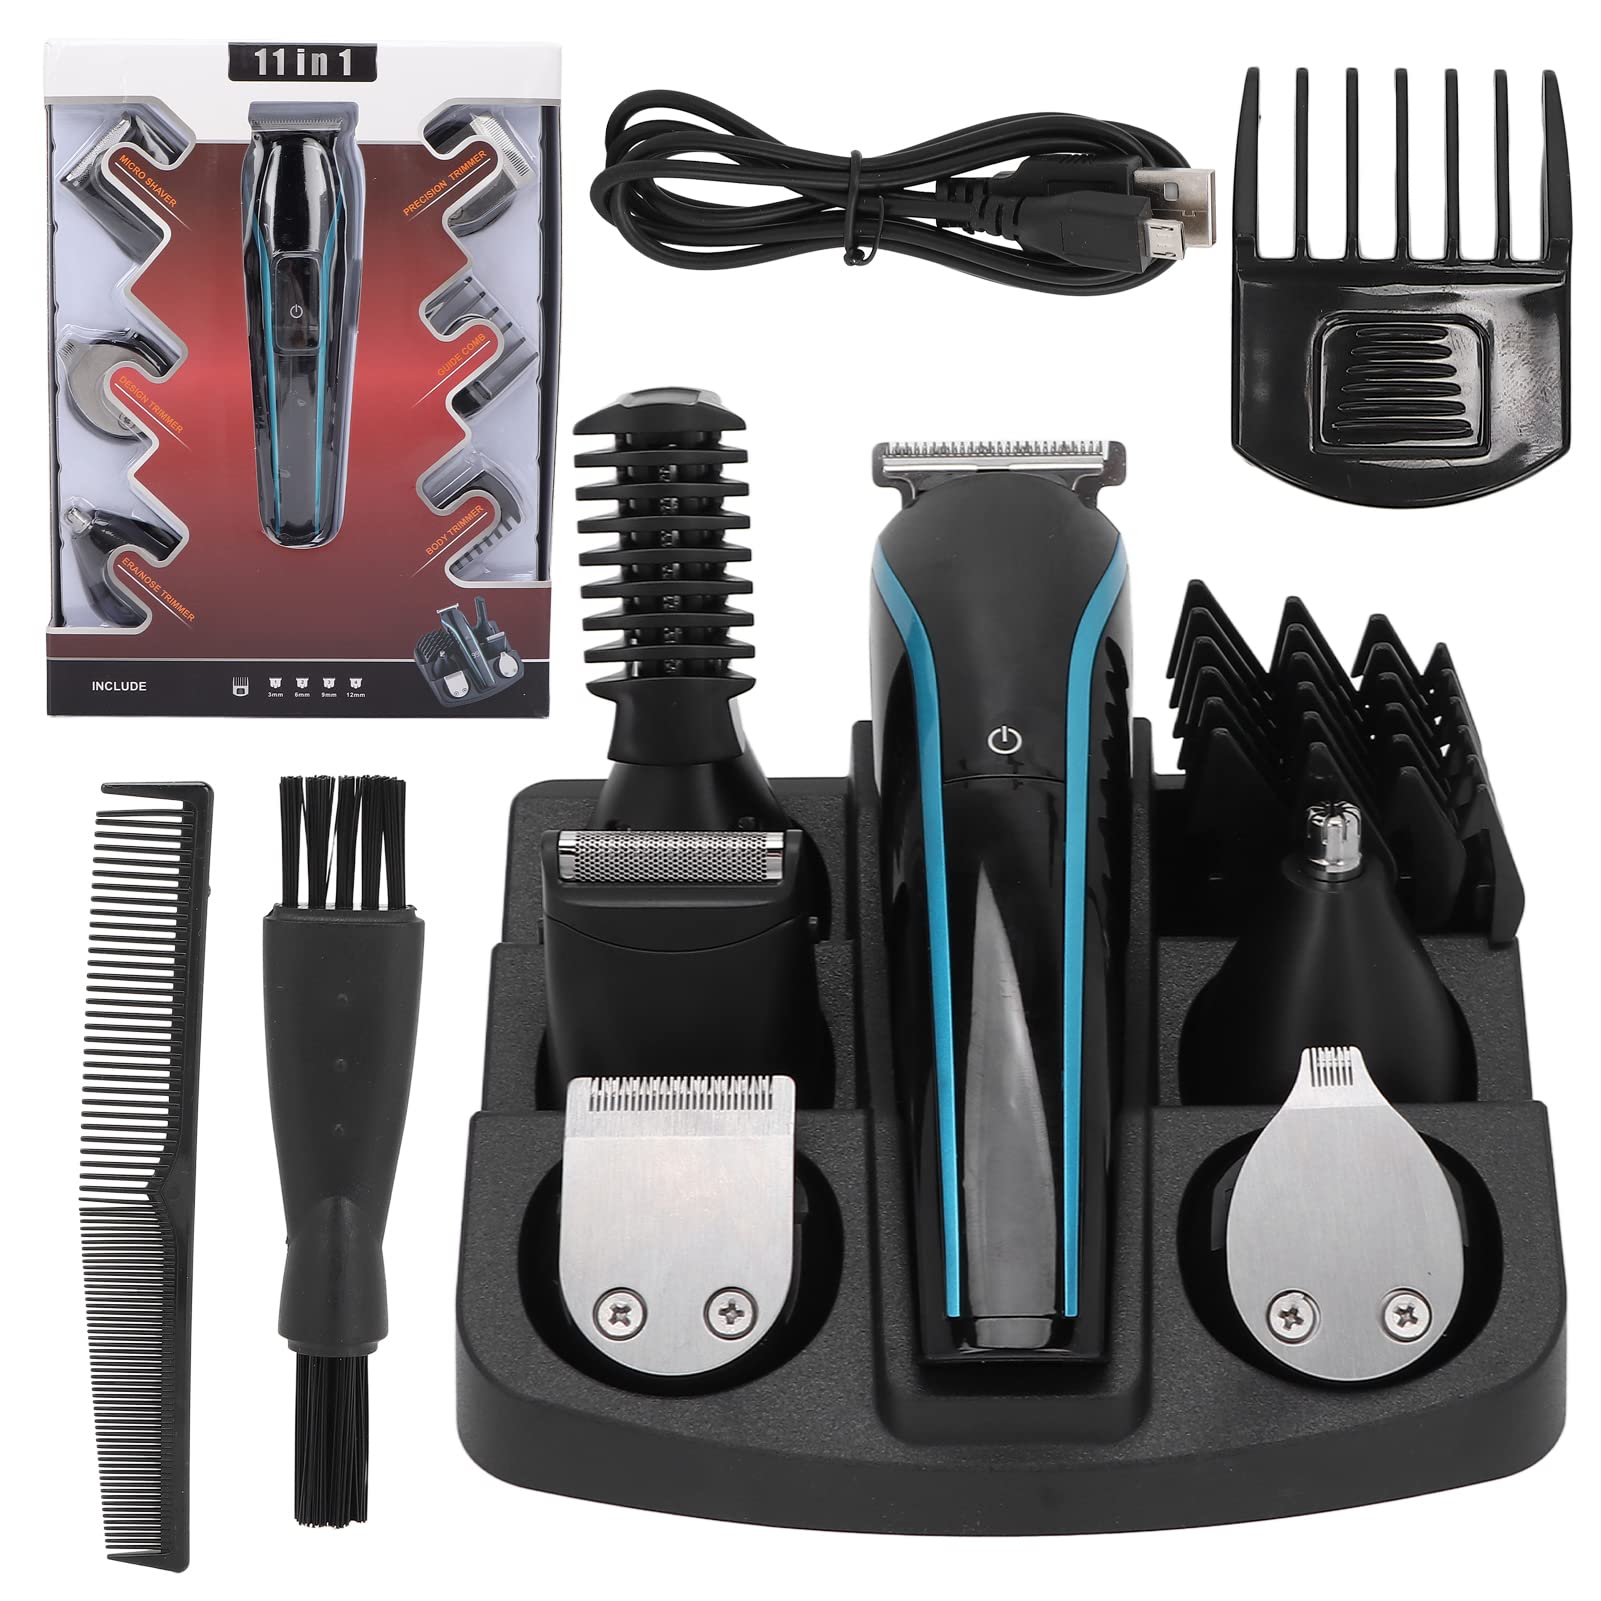 6 in 1 Electricr Beard Trimme Kit, Ergonomic Electric Hair Clipper – BABACLICK